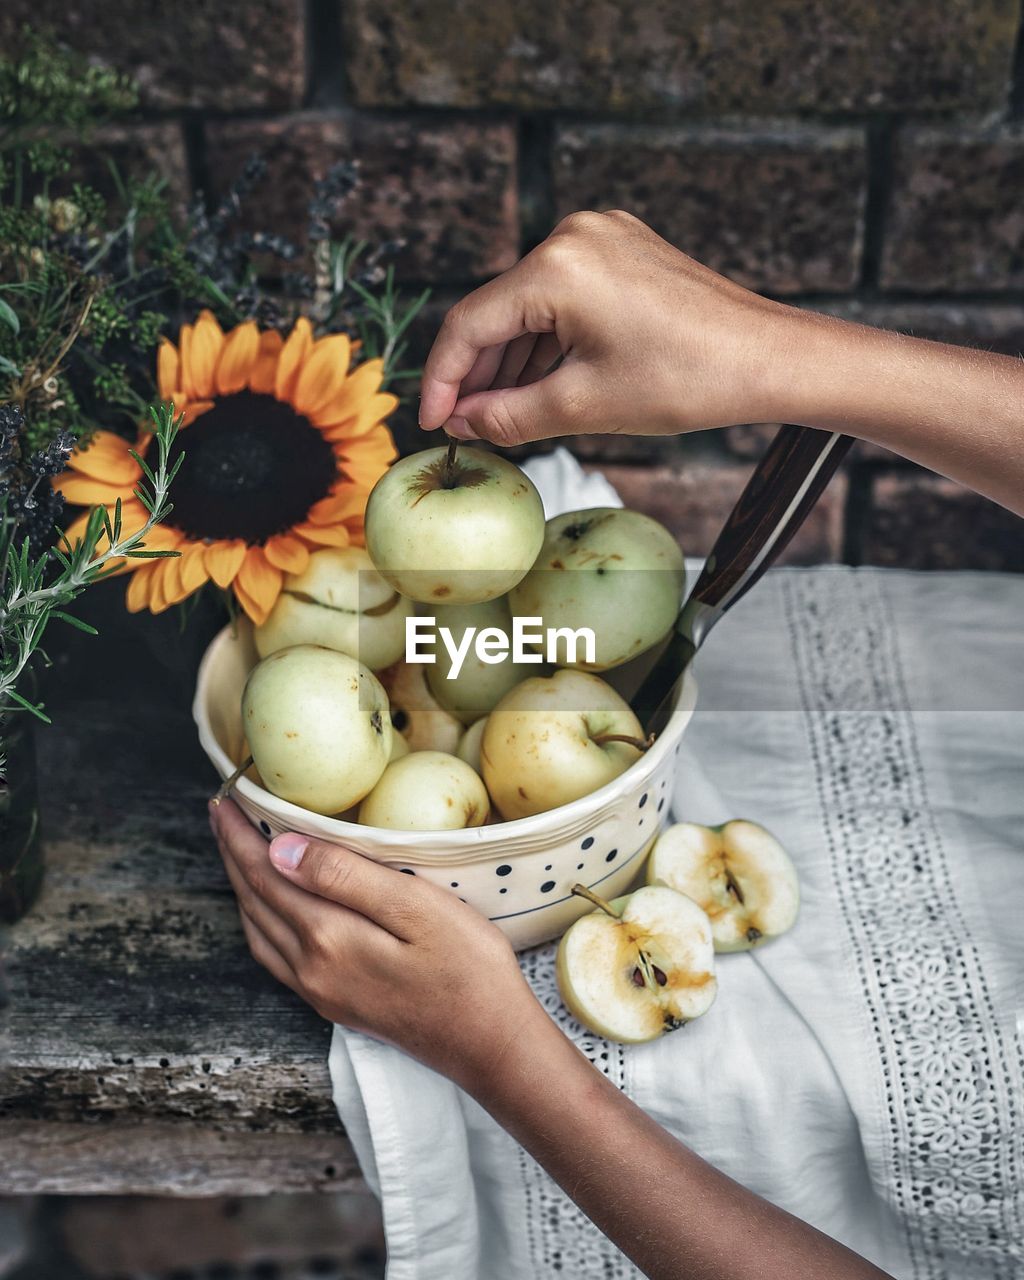 Cropped hands of woman arranging apples in bowl on table